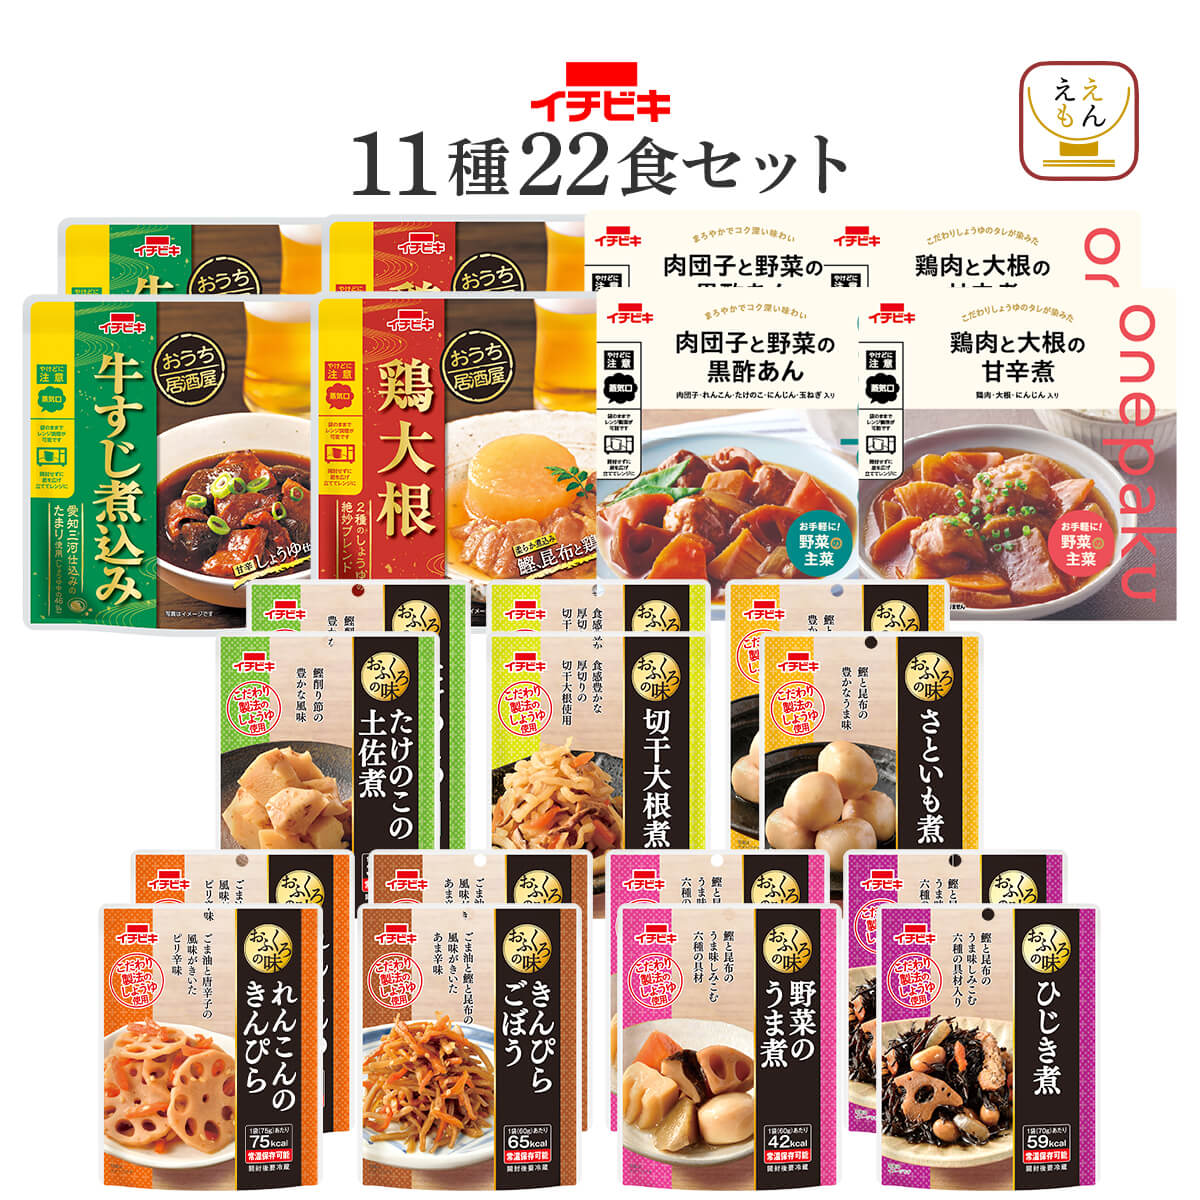  coupon distribution retortable pouch Japanese style daily dish side dish 11 kind 22 food set ichibiki normal temperature preservation meat vegetable present your order gourmet Father's day 2024 discount for early booking inside festival . gift 